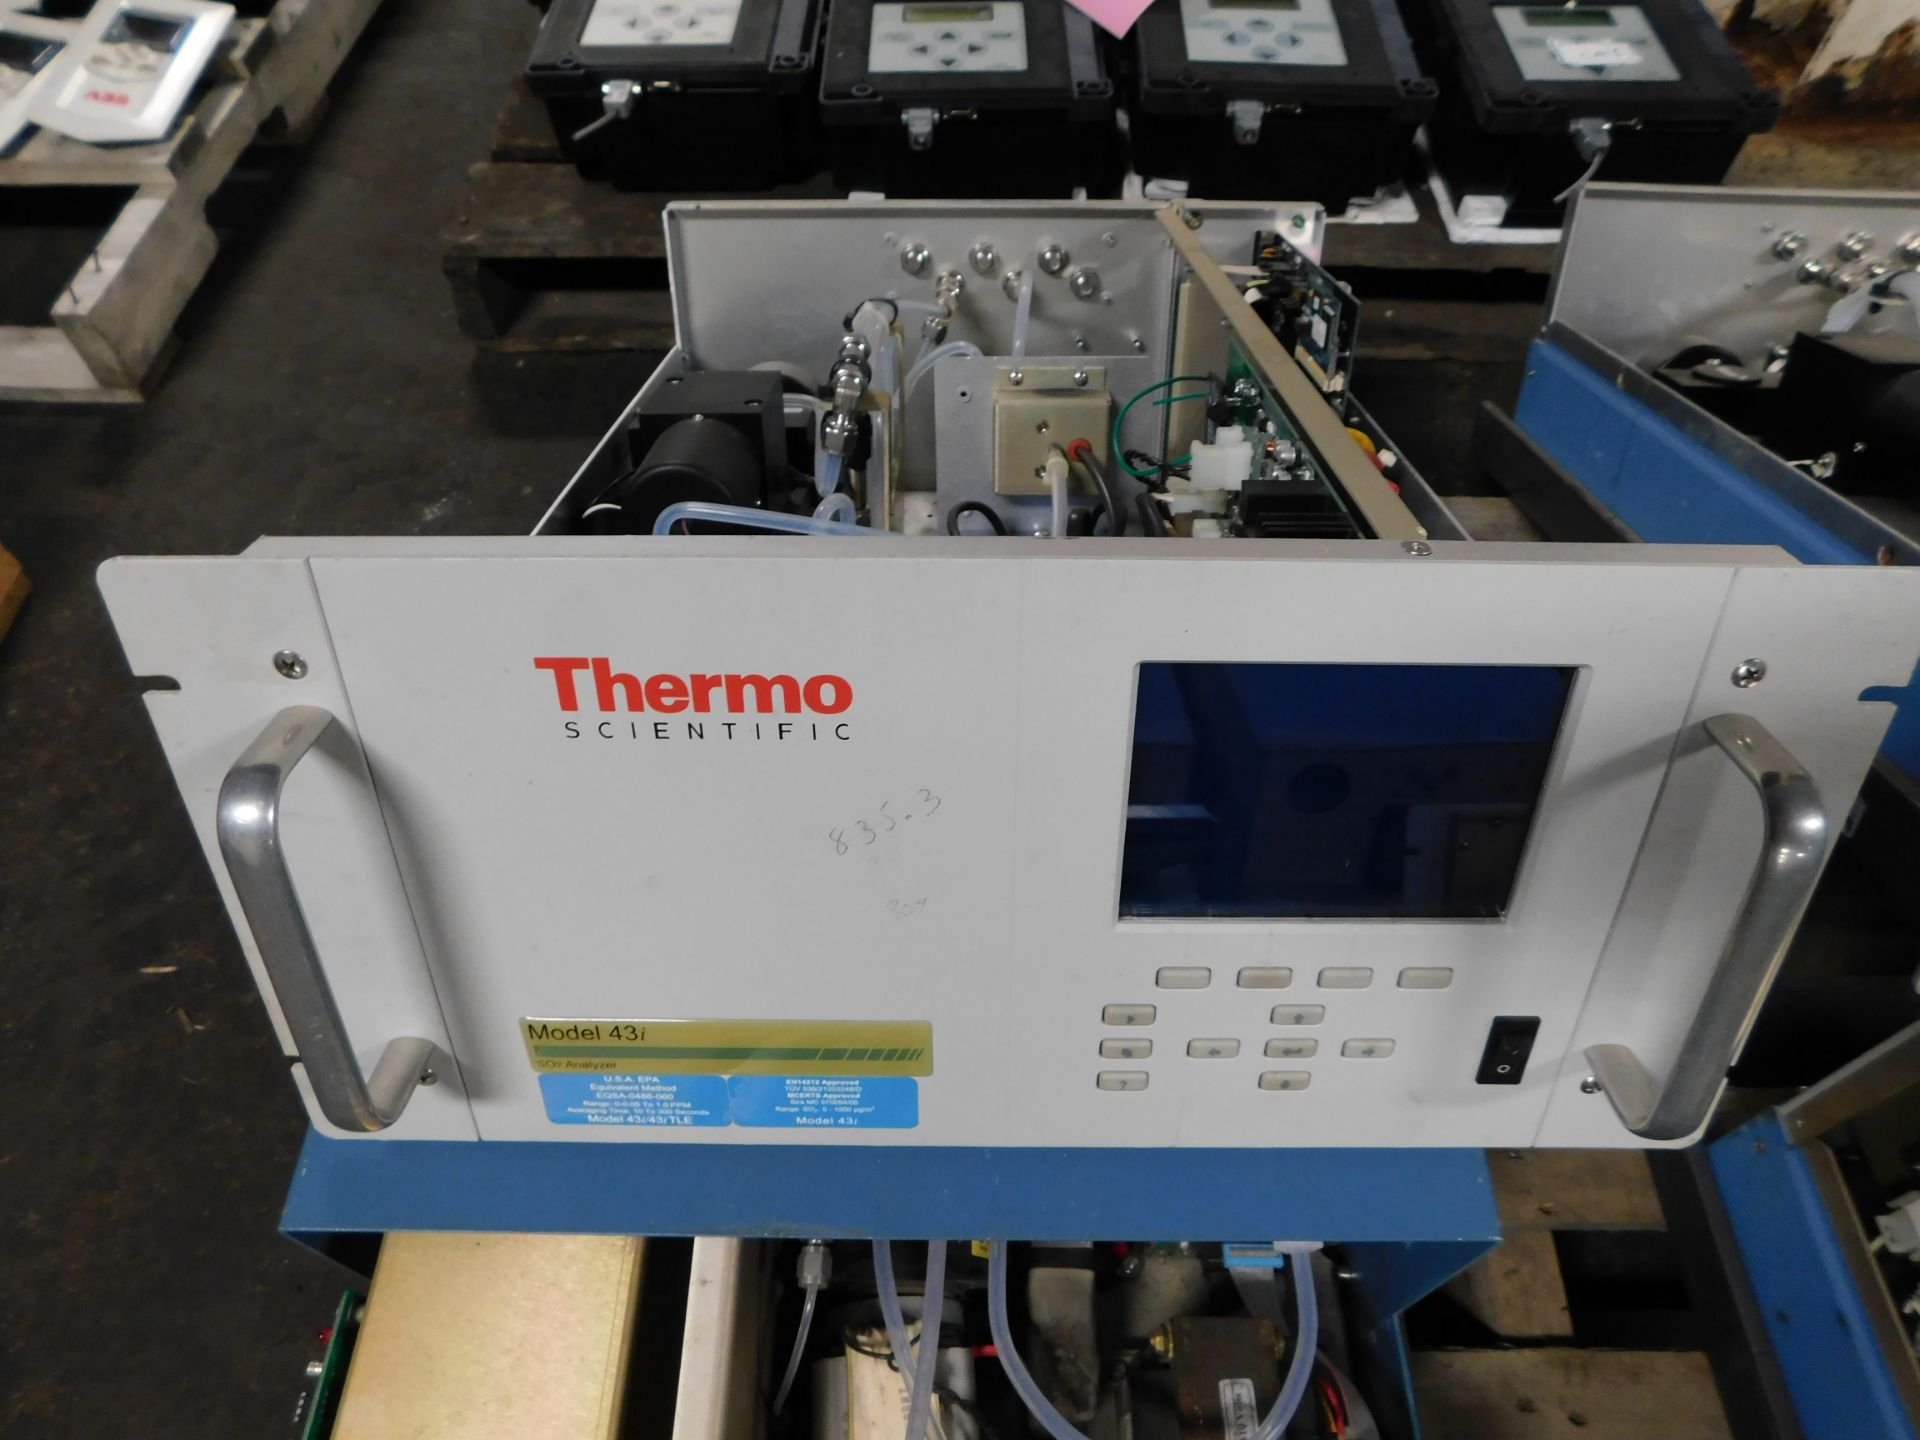 Pallet of Thermo CEMS Equipment - 42i, 42c, (2) 43i - Image 4 of 5